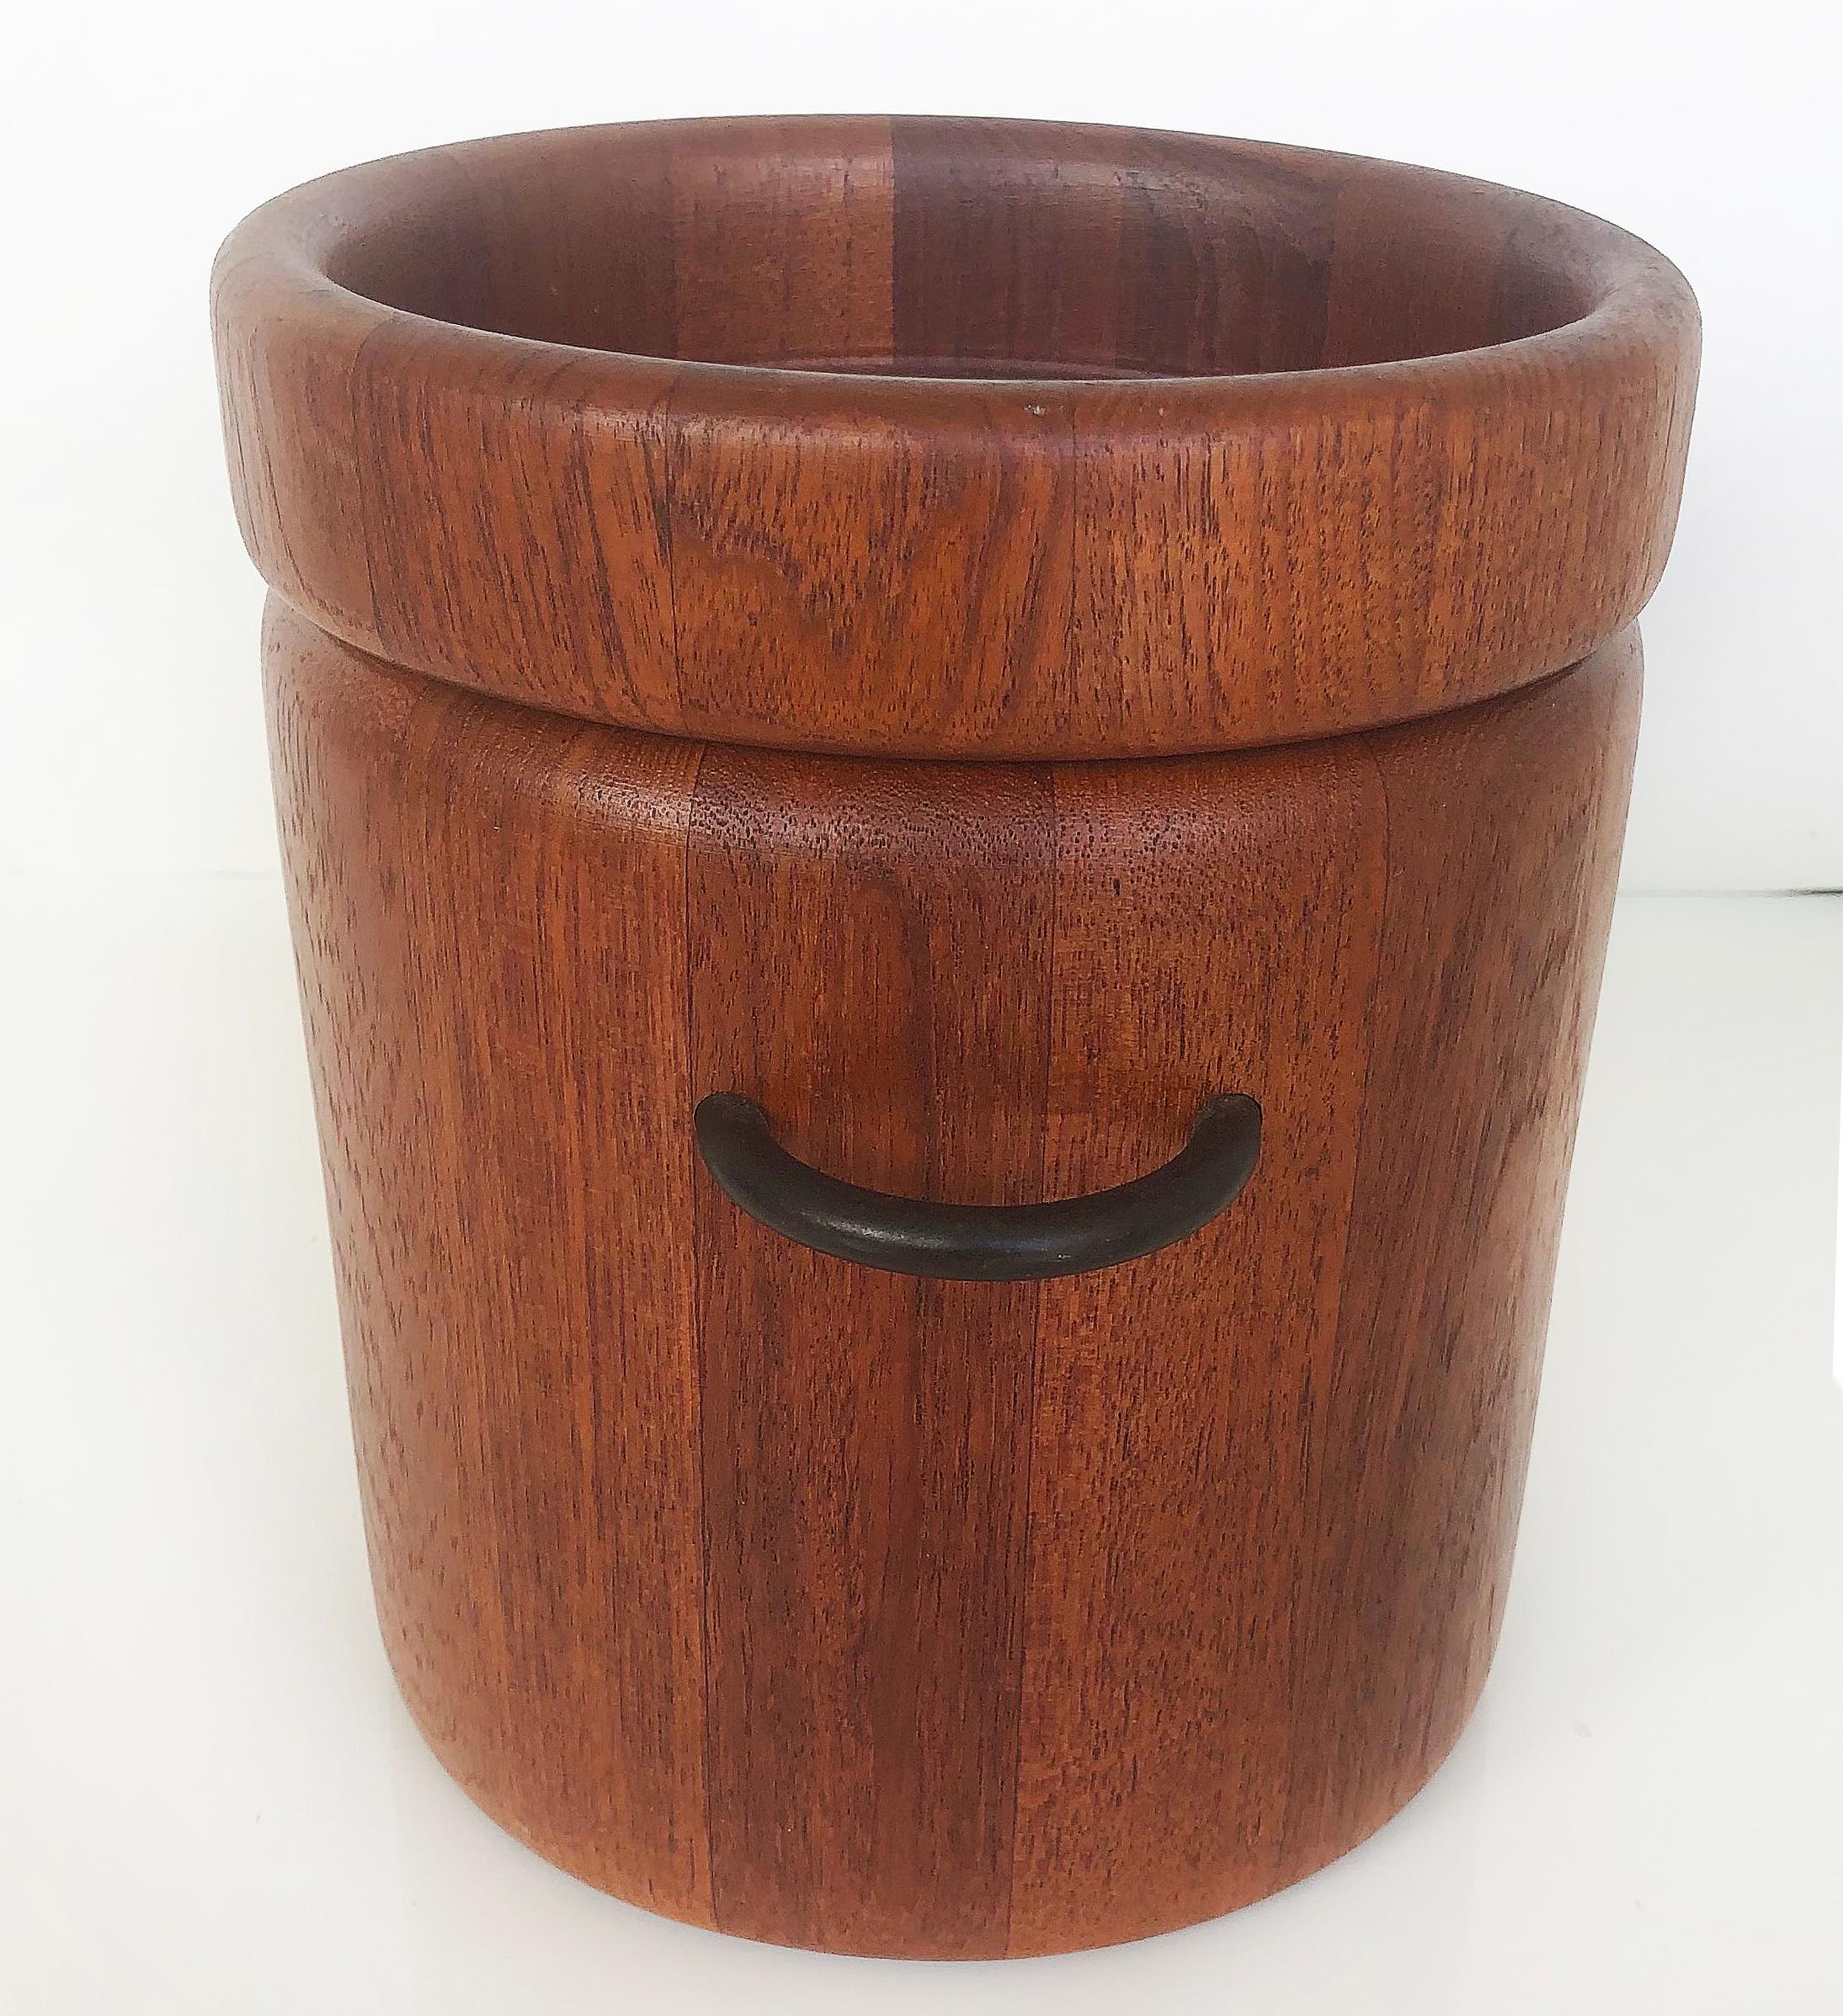 Danish Mid-Century Modern teak ice bucket by Digsmed Design

Offered for sale is a Danish Mid-Century Modern teak ice bucket by Digsmed Design of Denmark. It has the original plastic interior liner and retains the manufacturer's label on the